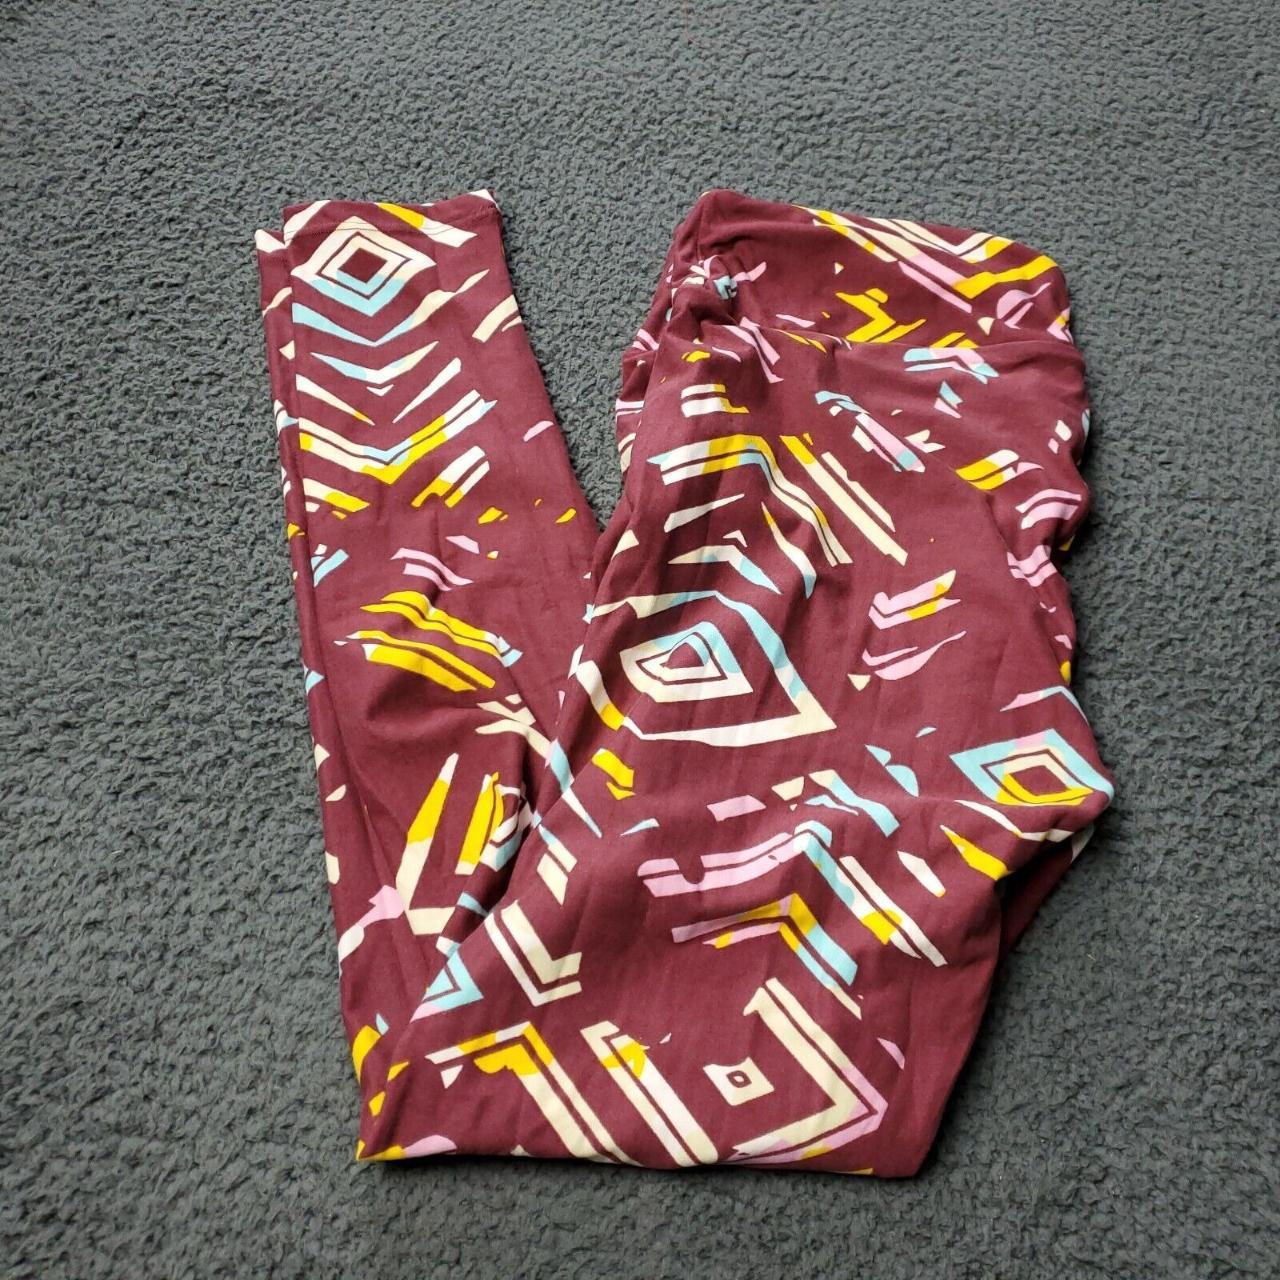 LulaRoe Leggings OS, Tall & Curvy, & more- TONS OF PATTERNS TO